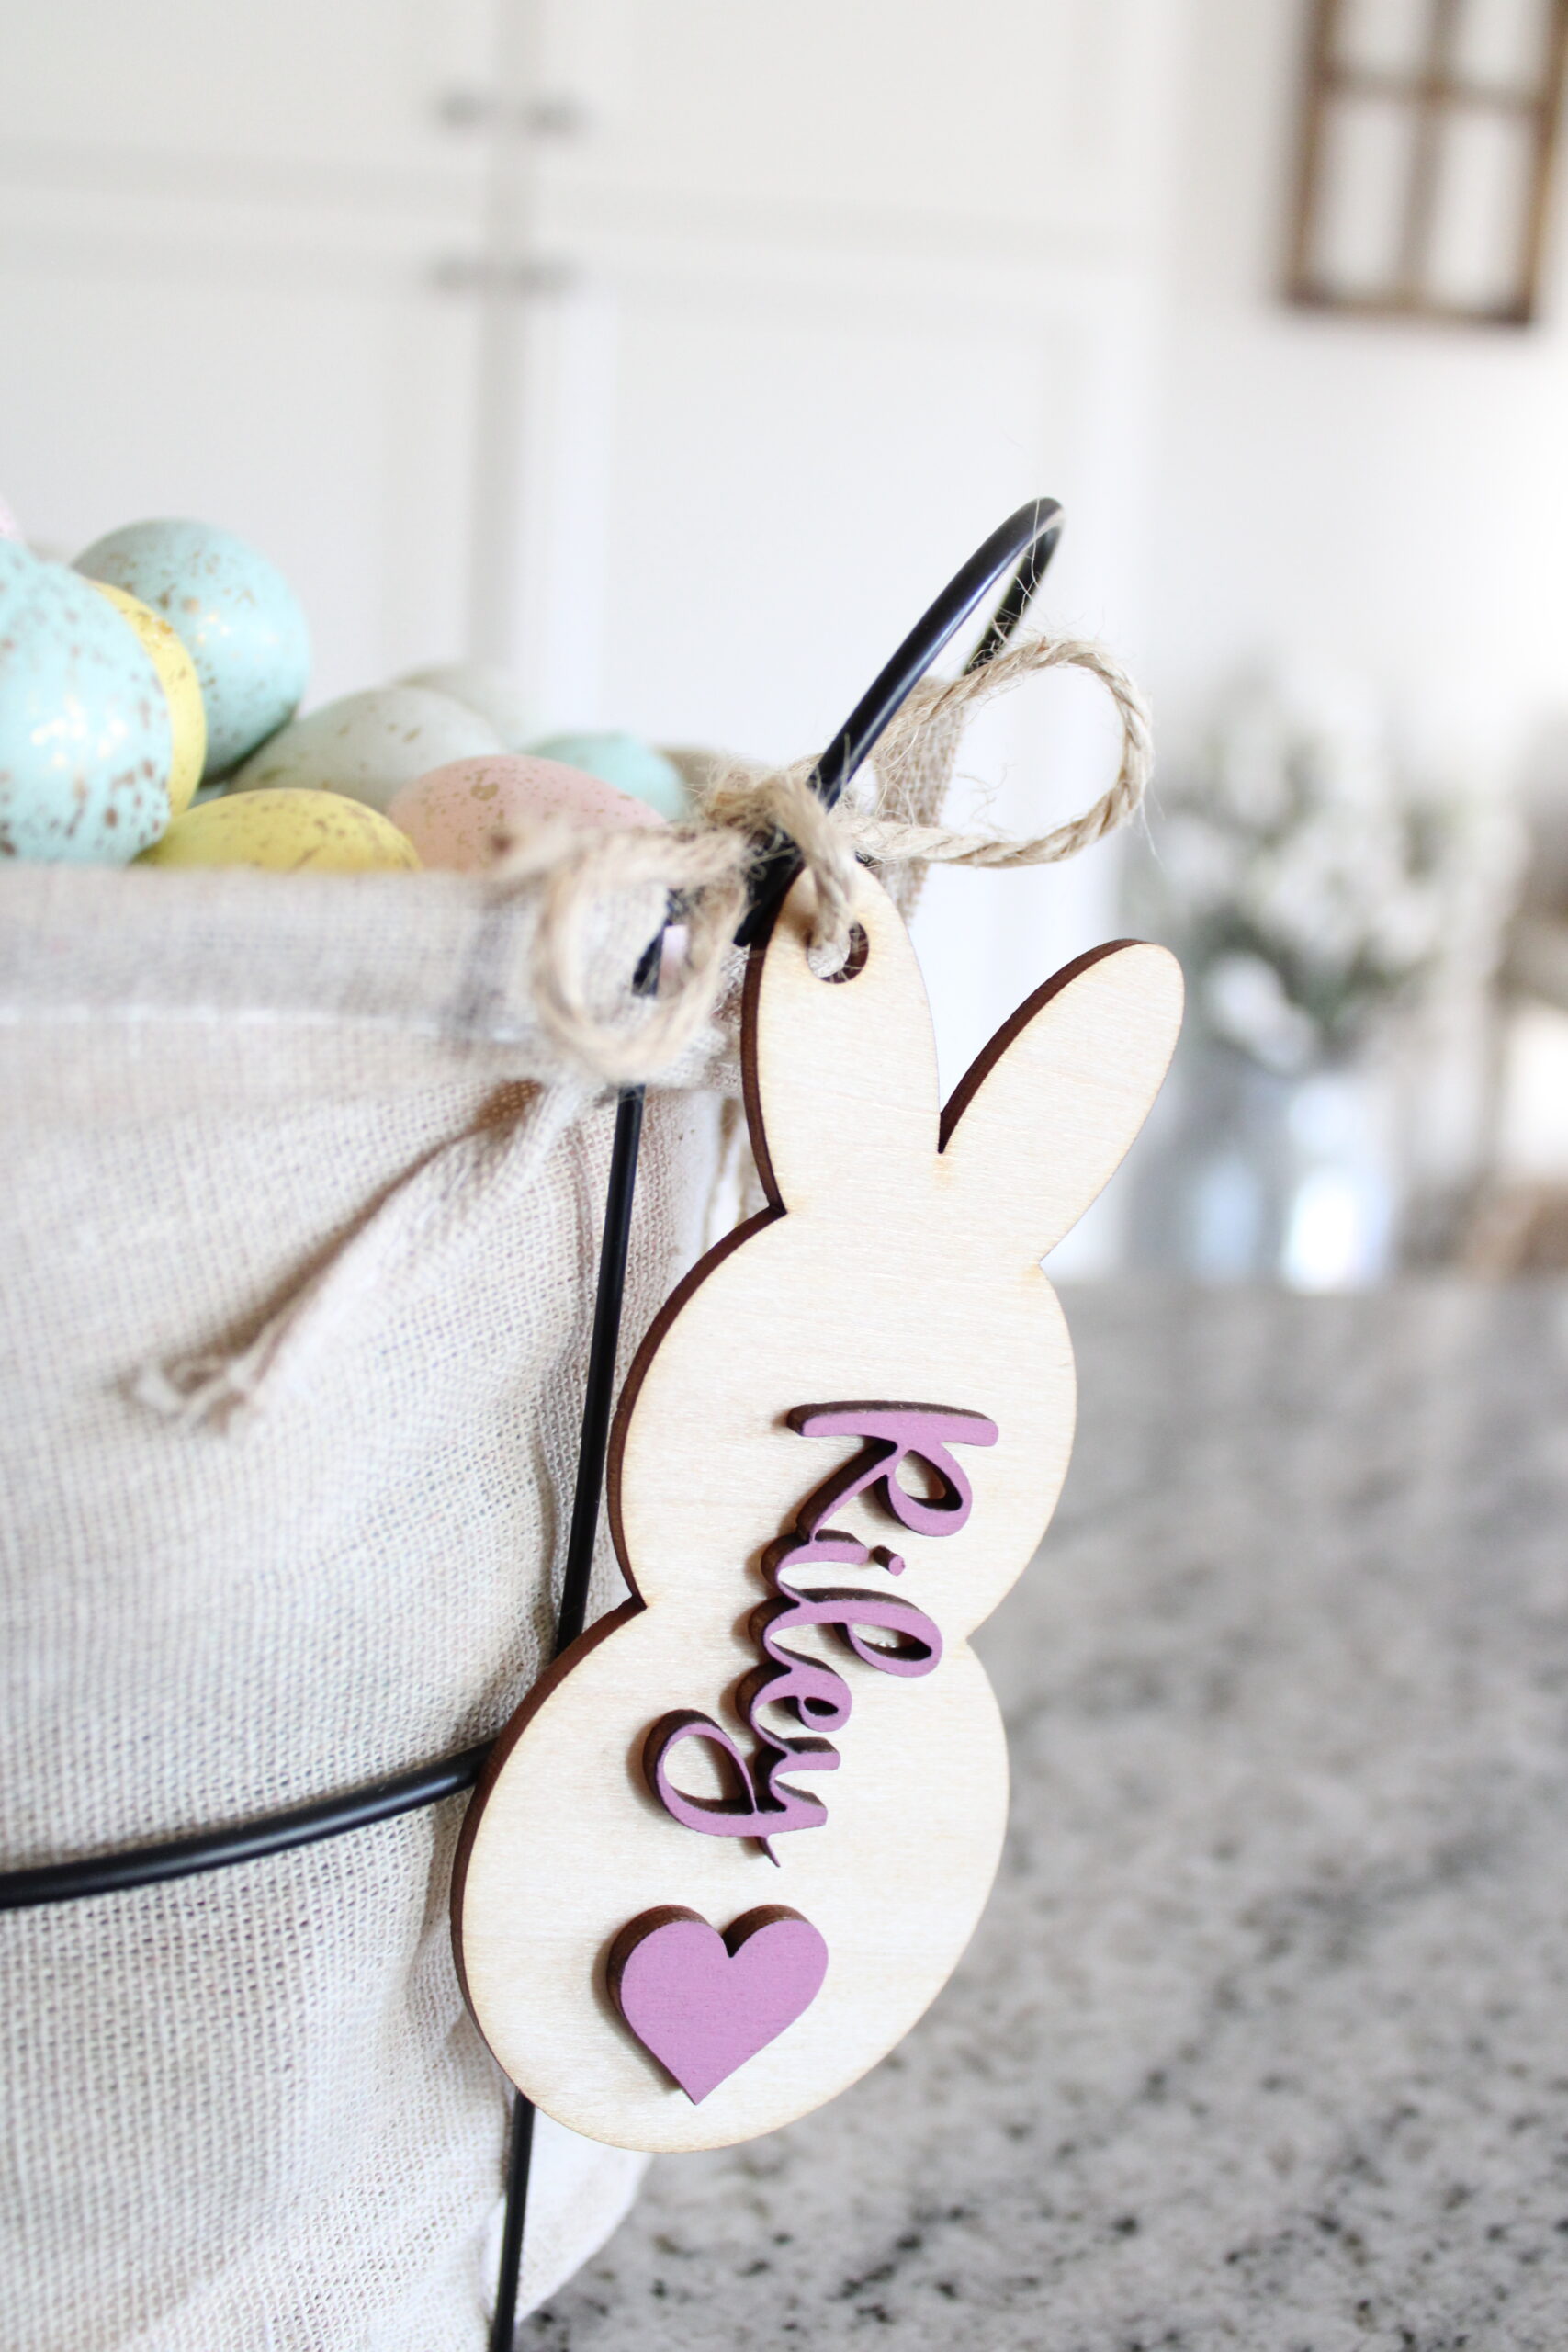 How to Make DIY Wooden Easter Basket Name Tags